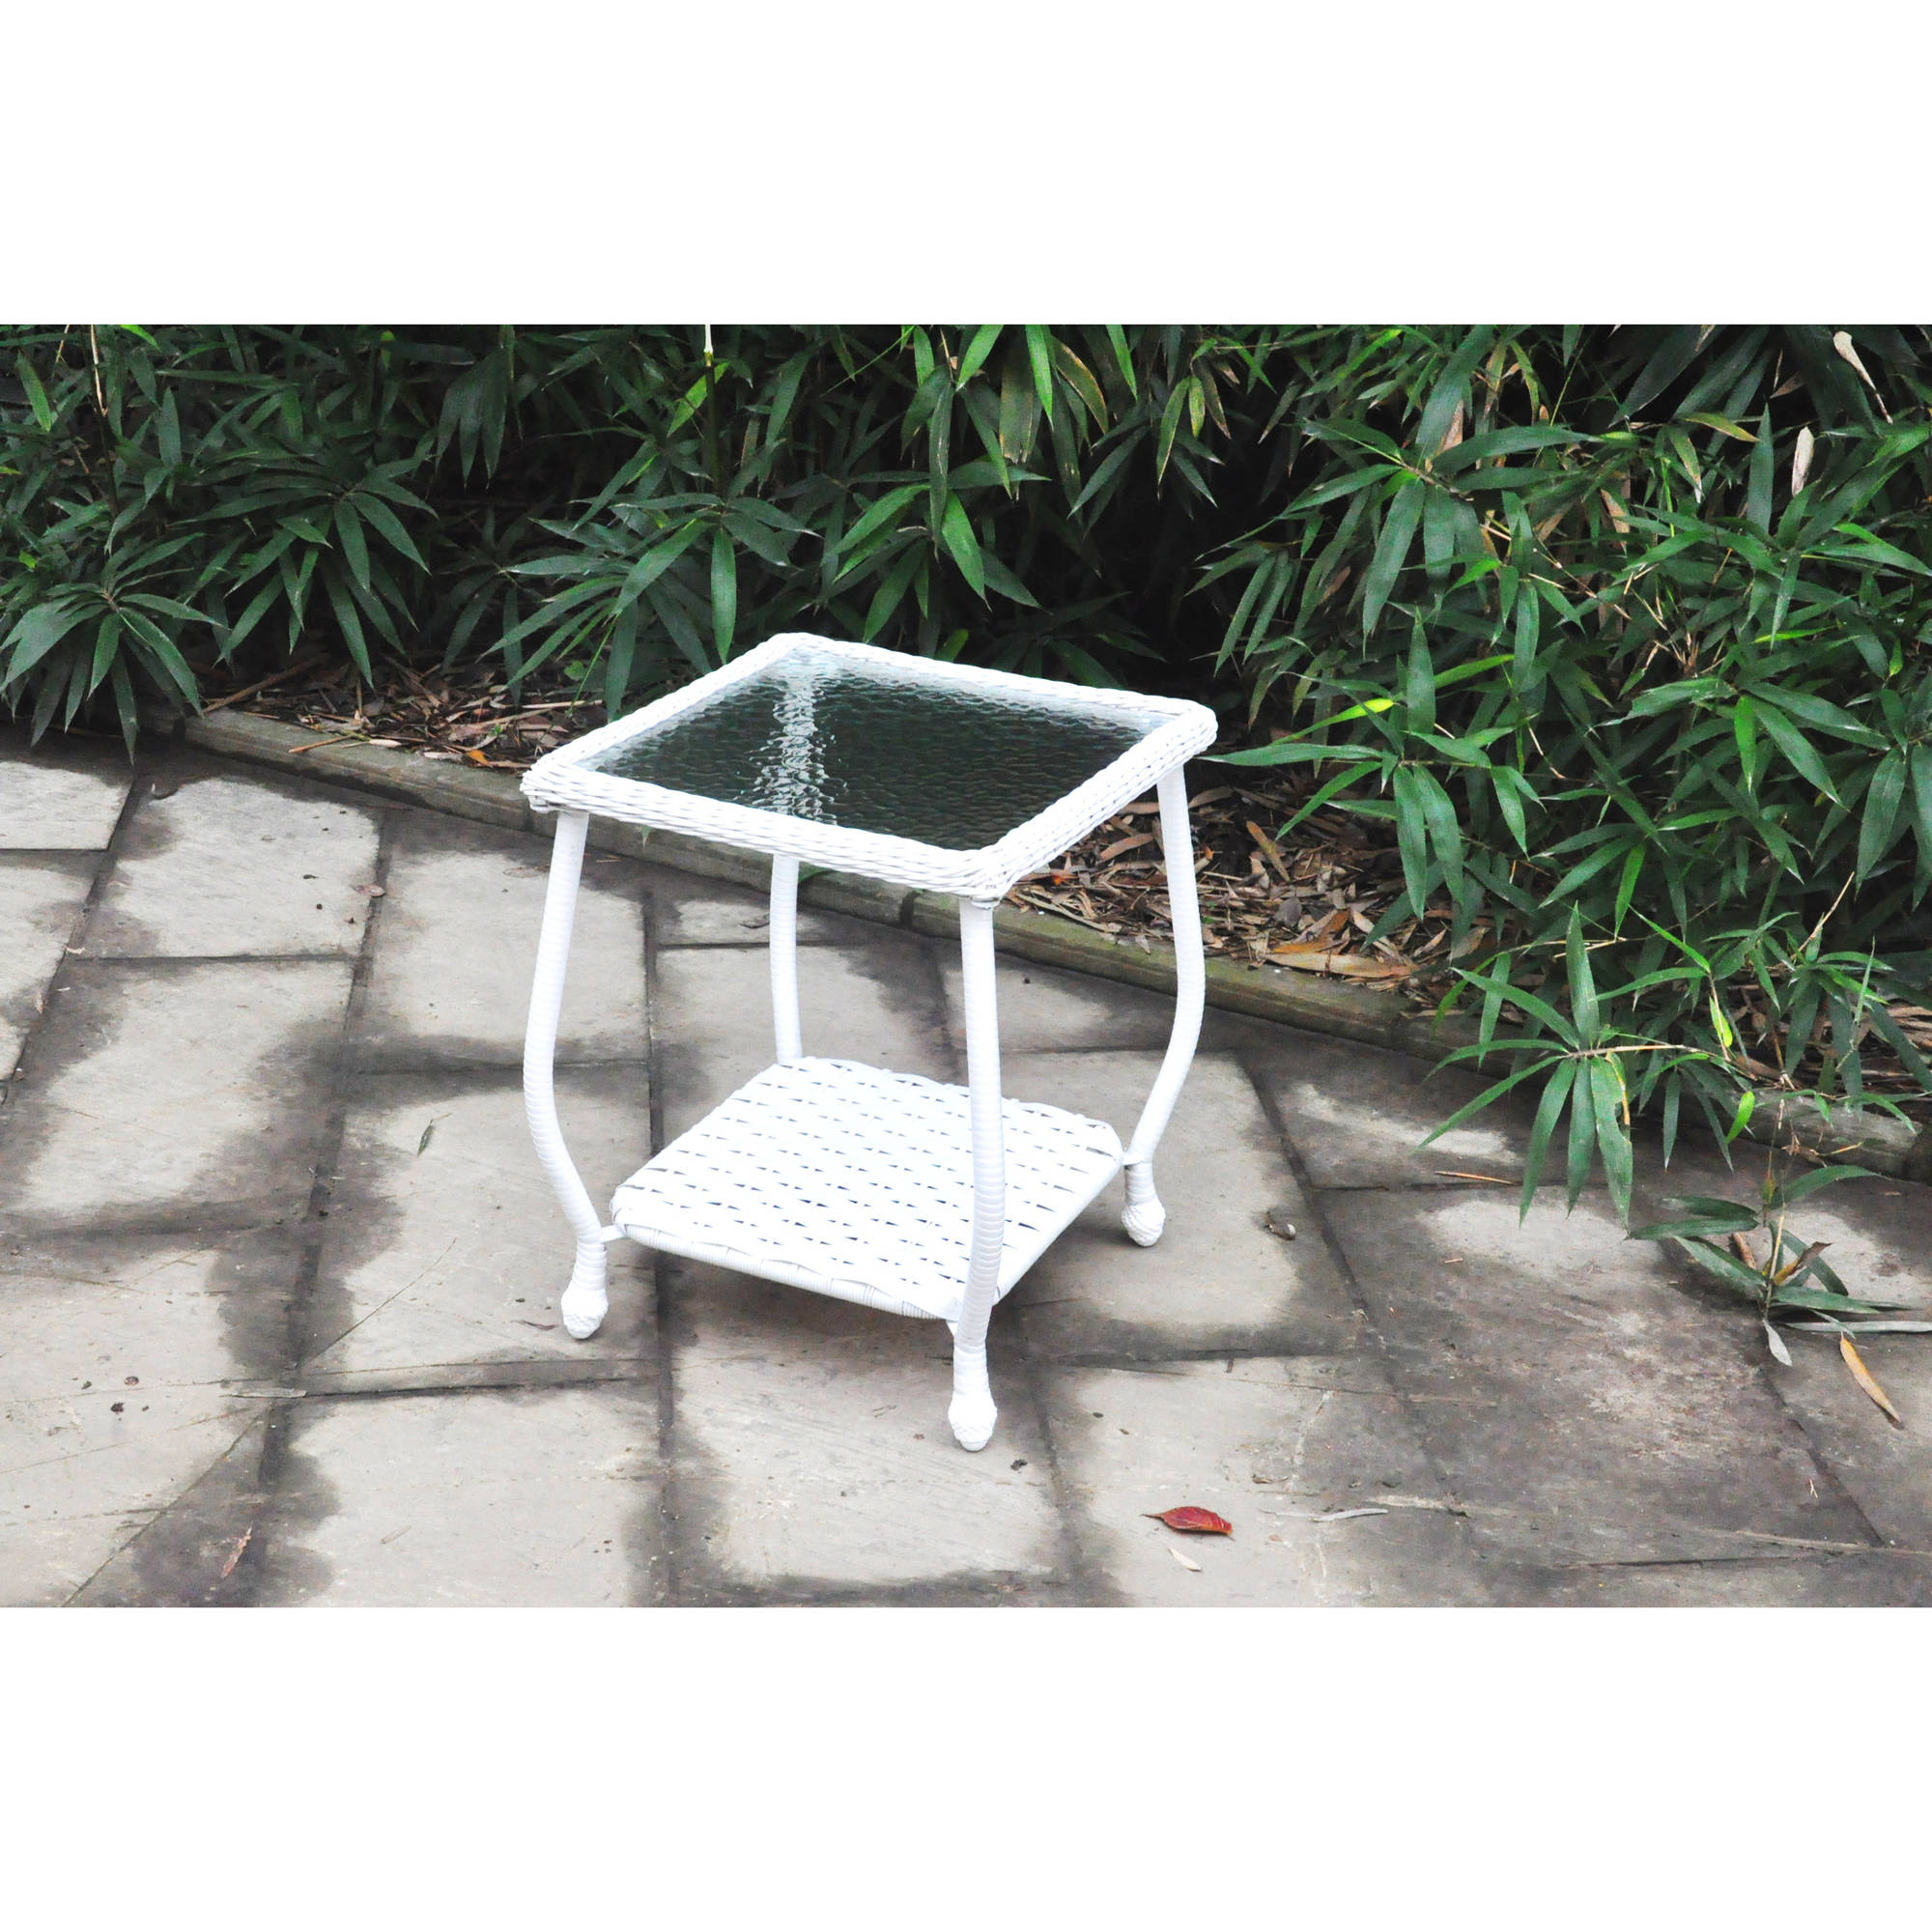 Mainstays Wicker Side Table, White - image 1 of 4